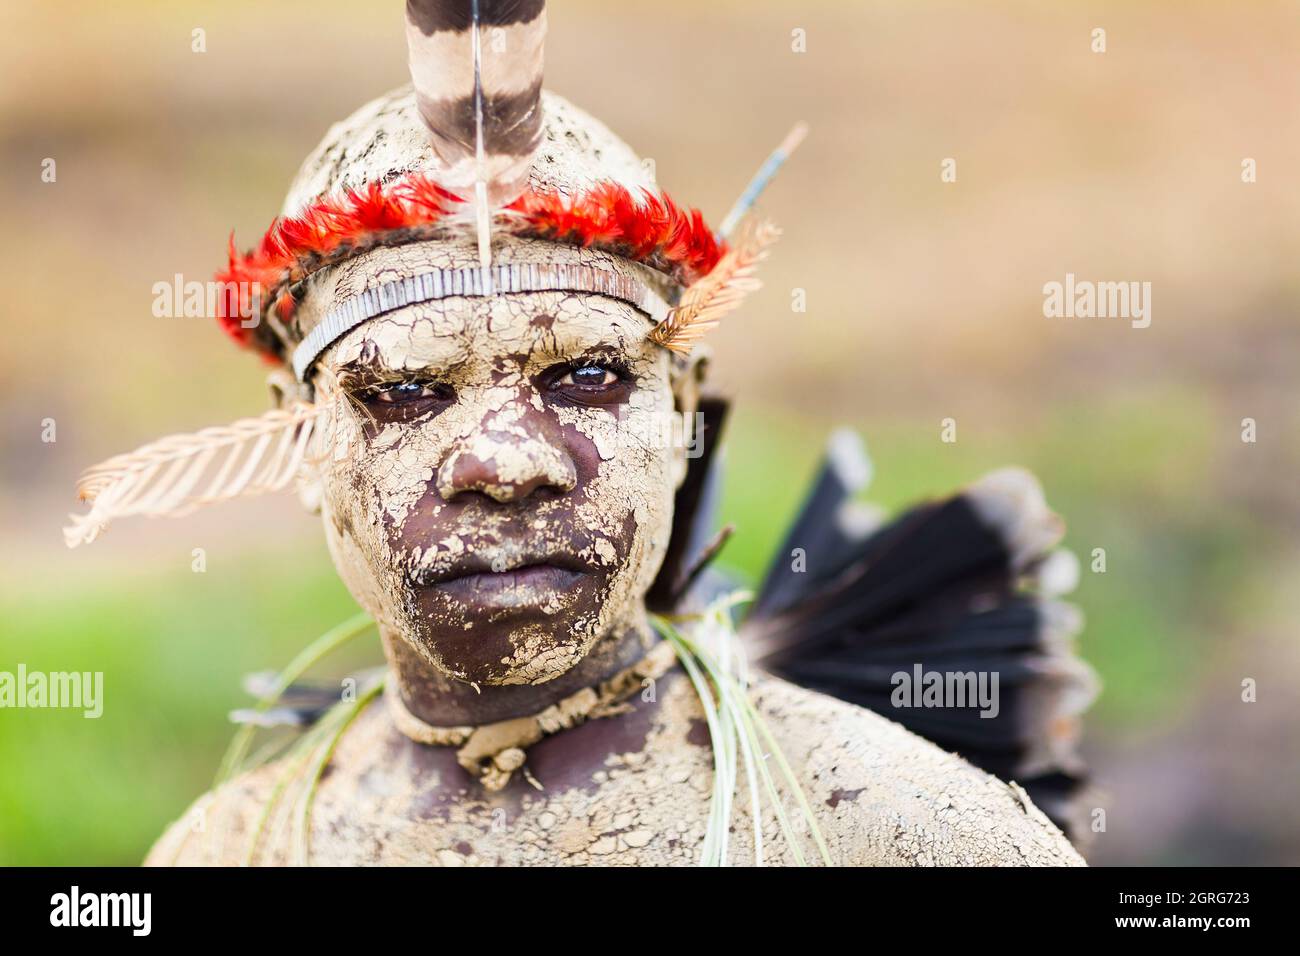 Indonesia, Papua, city of Wamena, portrait of a young Dani boy, face and body made up with earth. Baliem Valley Cultural Festival, every August, tribes come together to perform ancestral war scenes, parade and dance in traditional clothes Stock Photo